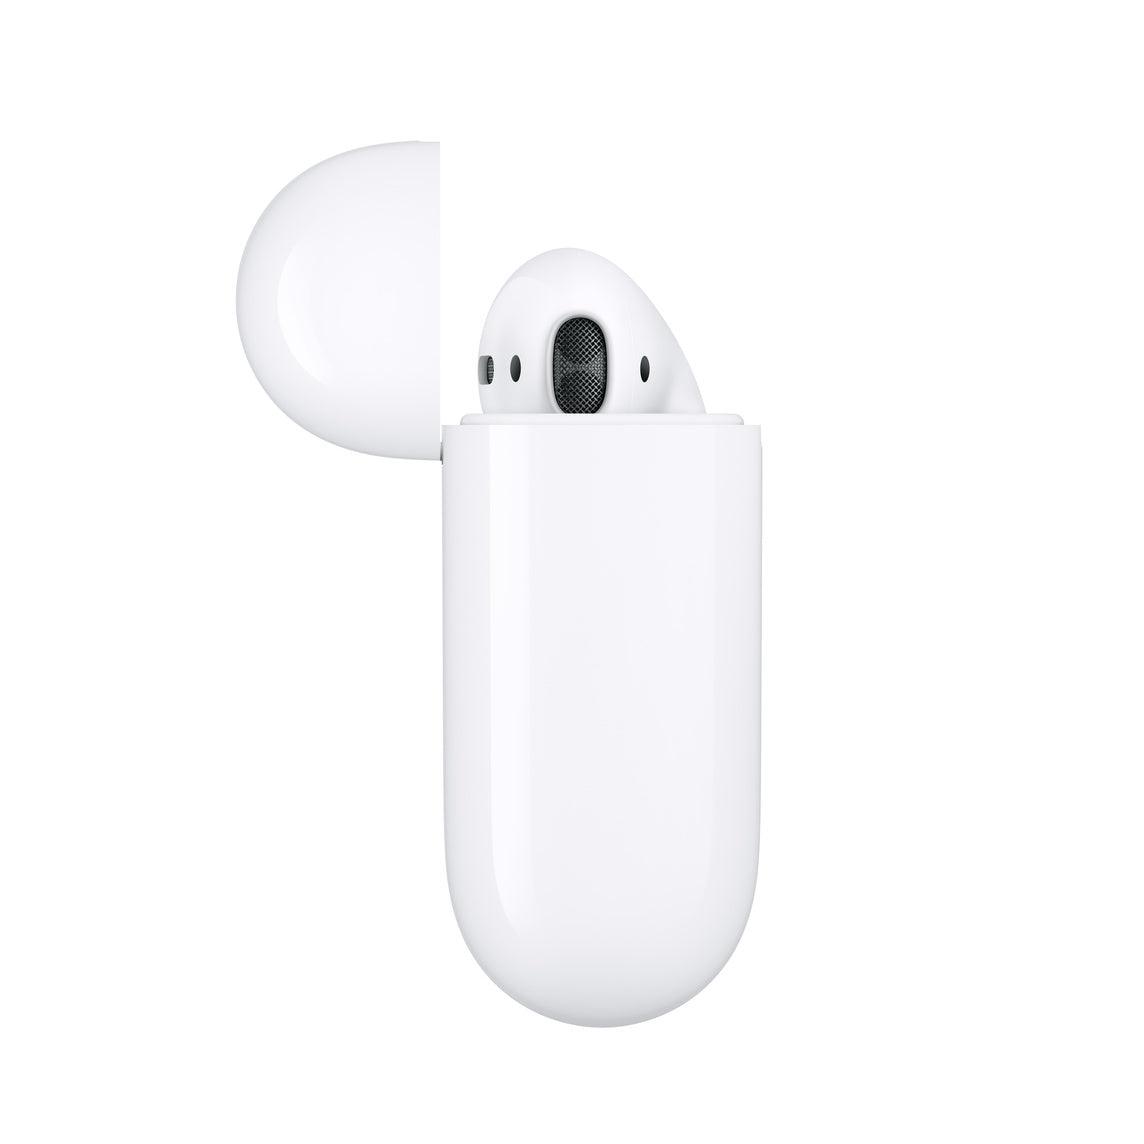 Apple AirPods 2 with Charging Case Bluetooth Headset - White - Apple AirPods 2 with Charging Case Bluetooth Headset - White - undefined Ennap.com